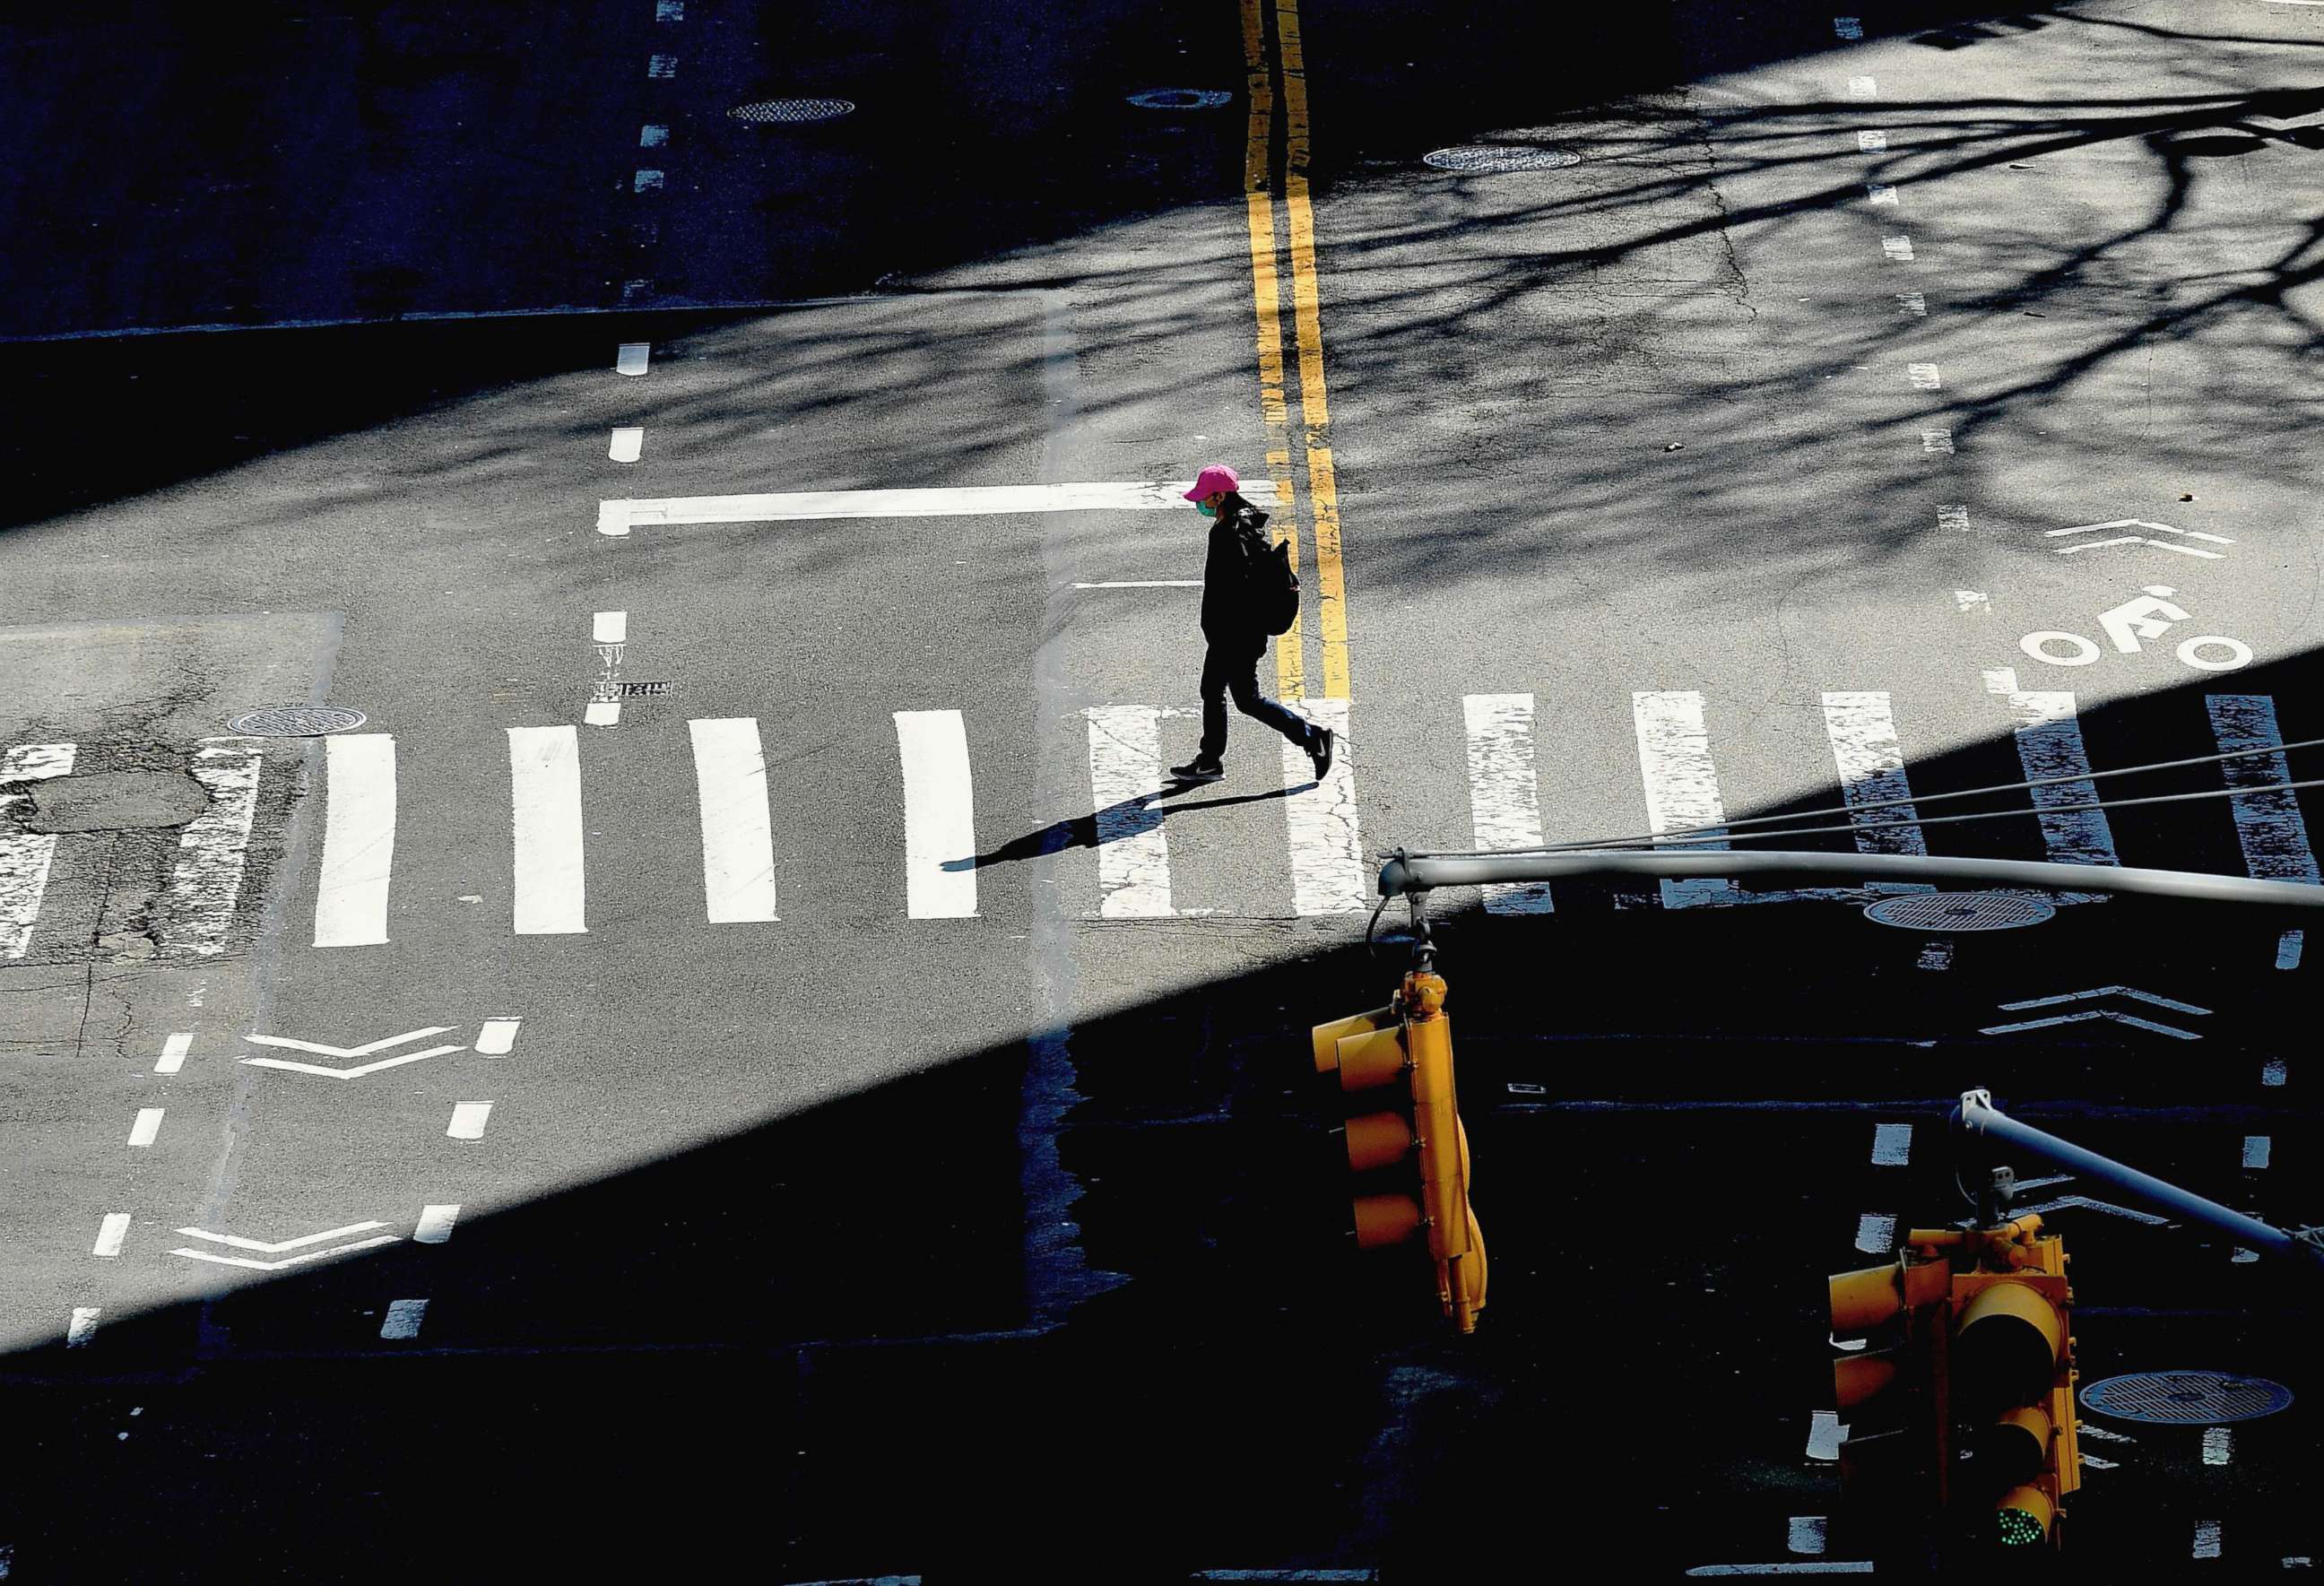 PHOTO: A person crosses the street on March 27, 2020 in New York City.